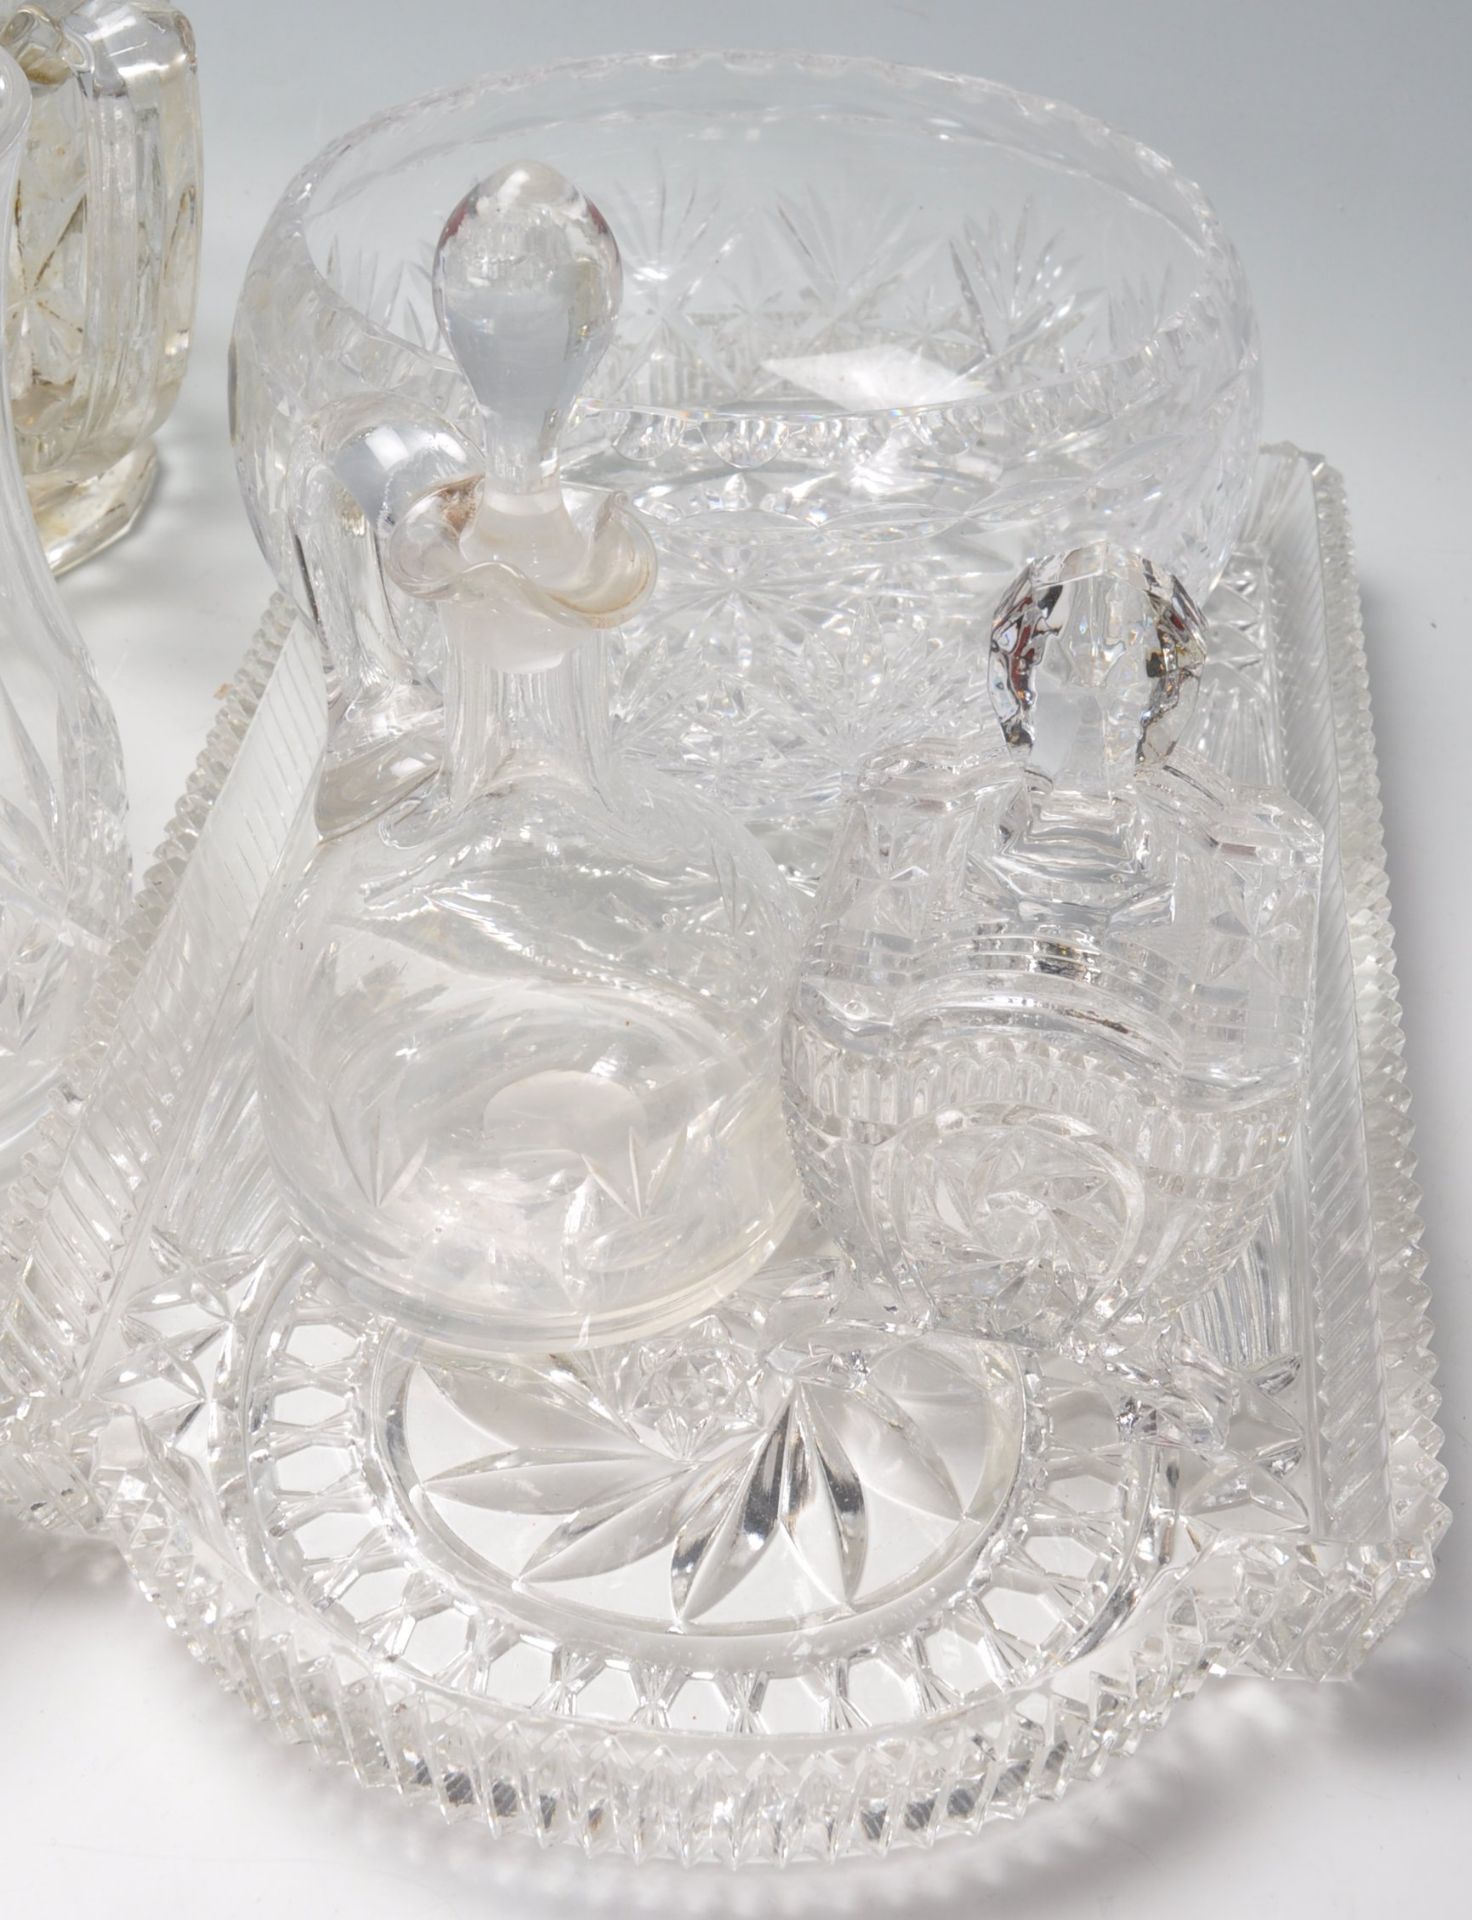 LARGE COLLECTION OF 20TH CENTURY CRYSTAL CUT GLASS - Image 10 of 11